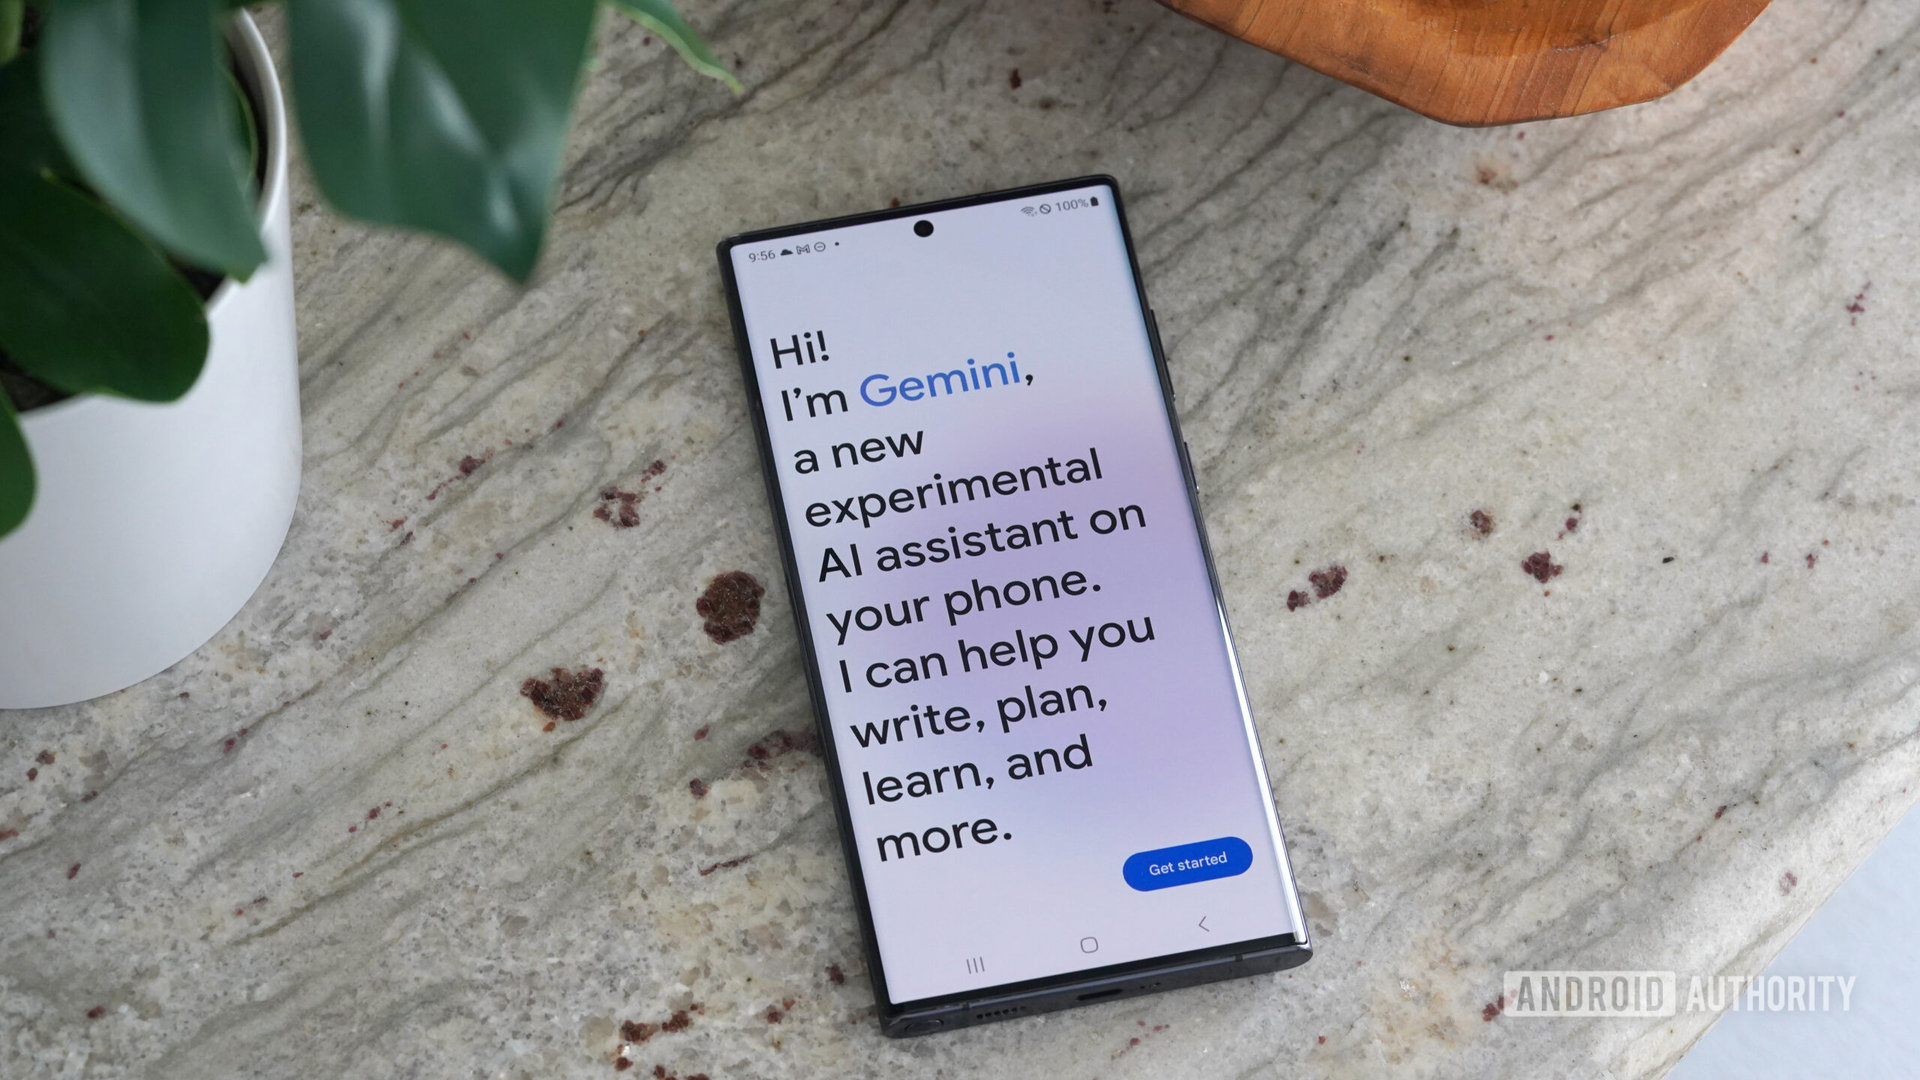 Gemini’s growing pains: Google explains what went wrong with its AI images